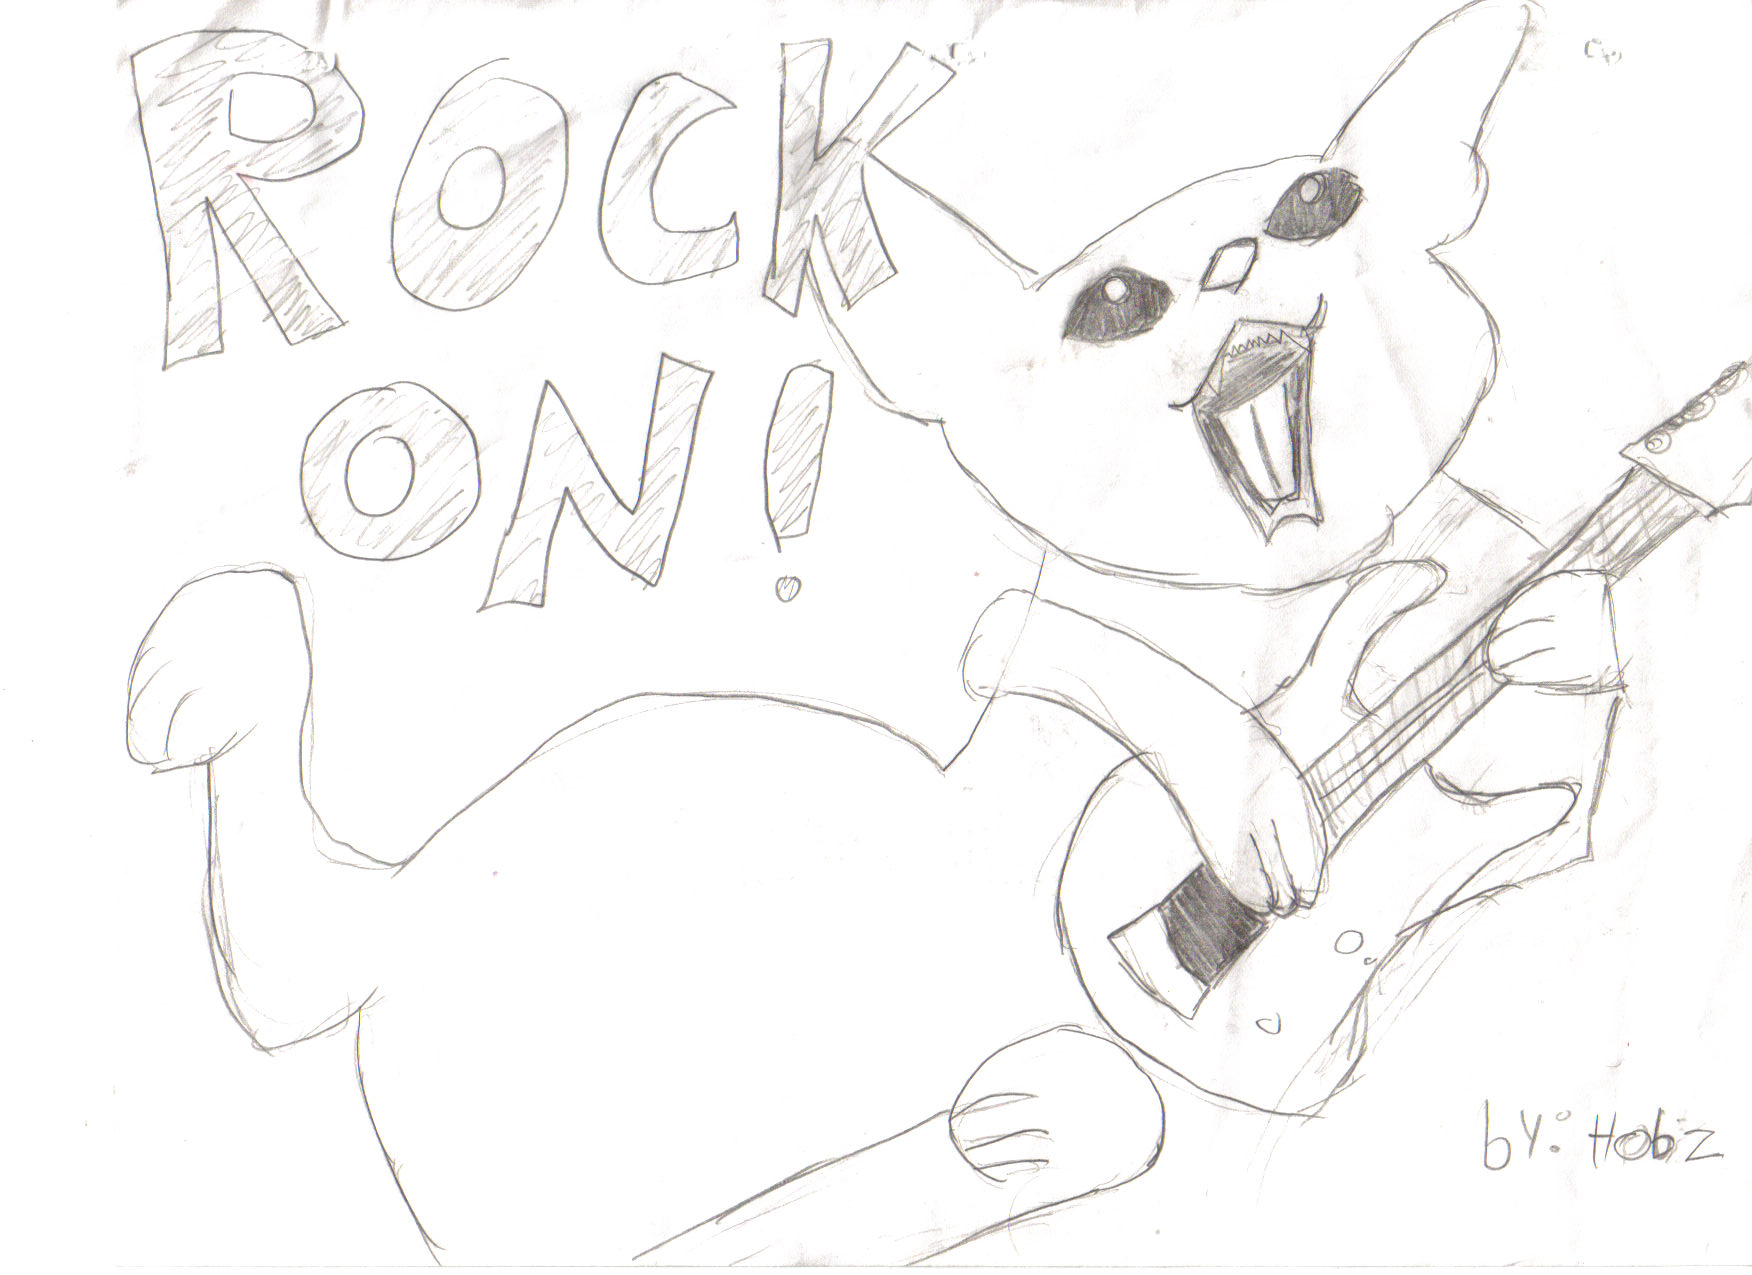 ROCK ON by Hobz_the_destroyer